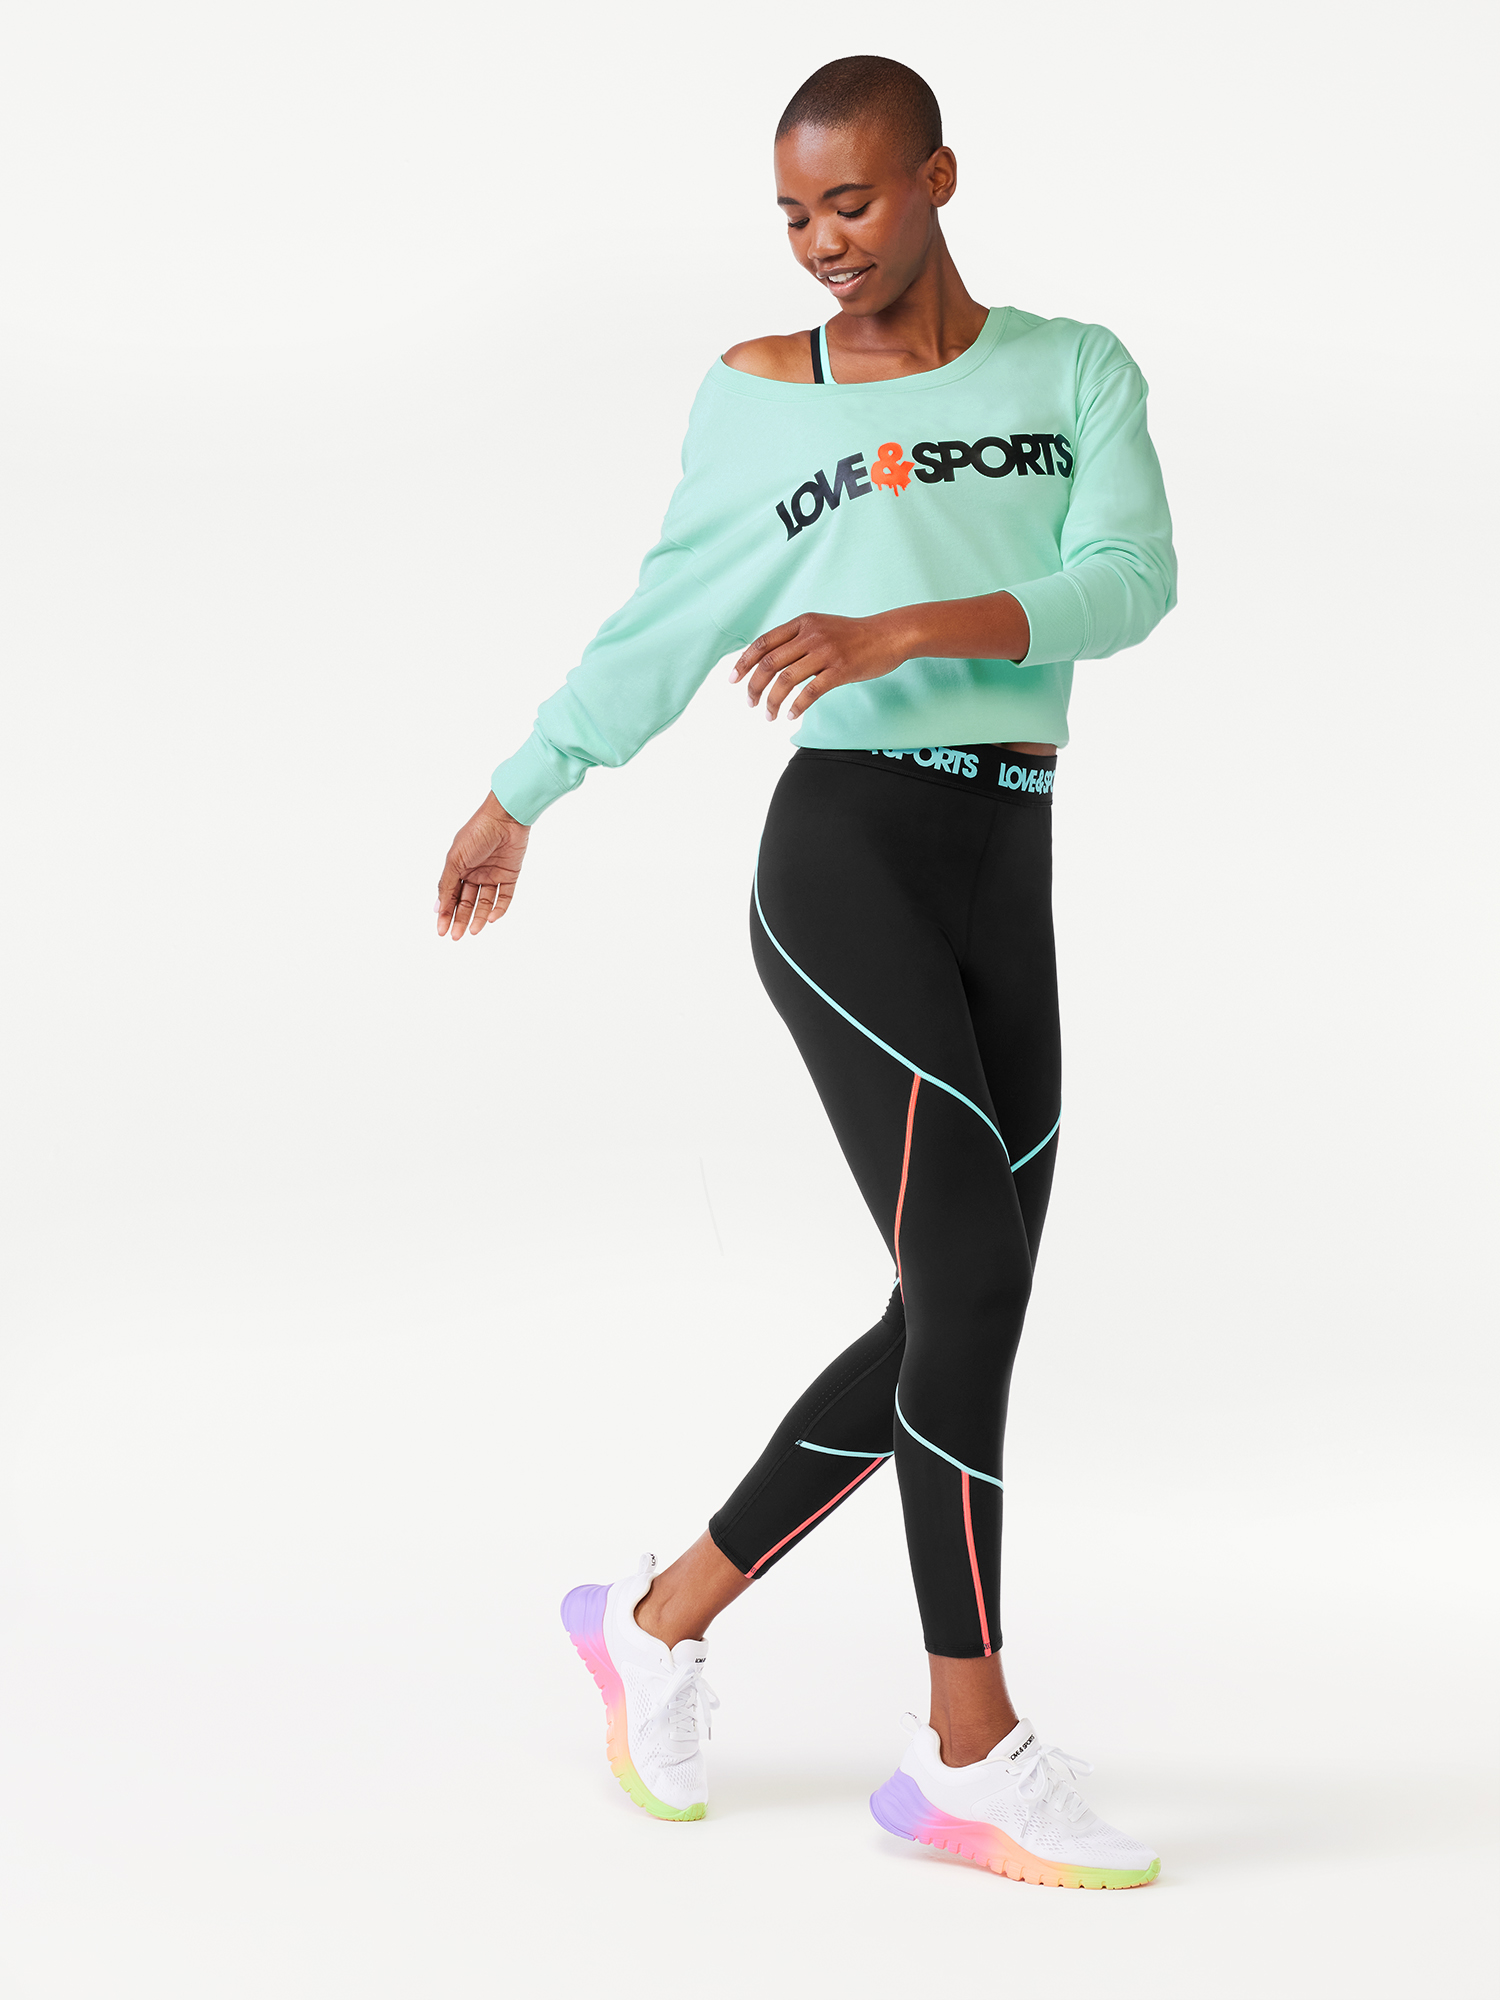 Sports leggings for women have become an essential component of activewear wardrobes, offering both style and functionality for women